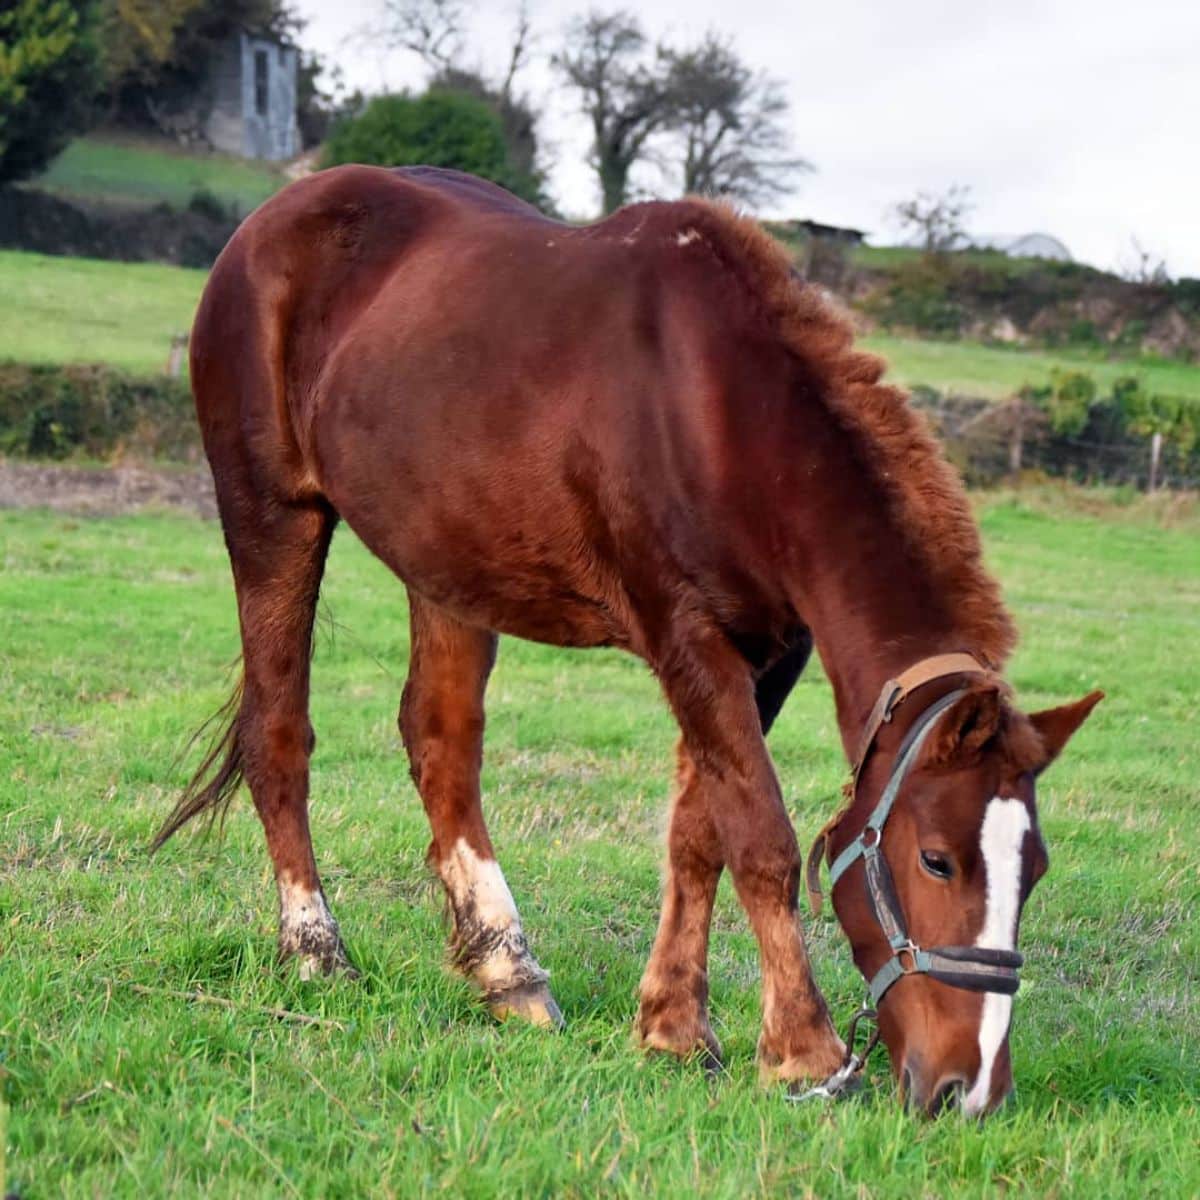 A brown Galician horse grazes on a green lawn.